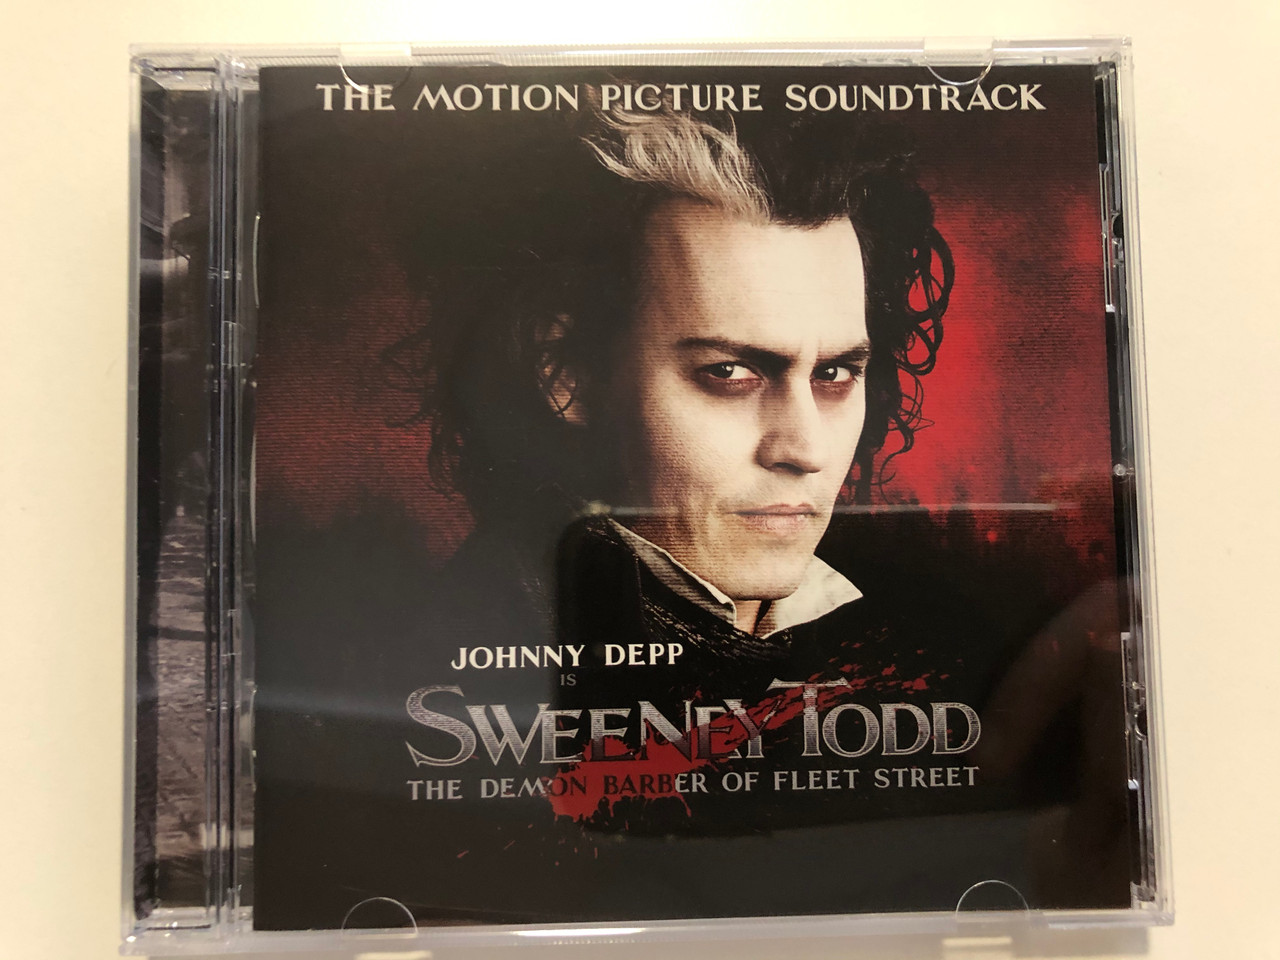 https://cdn10.bigcommerce.com/s-62bdpkt7pb/products/31227/images/183809/Johnny_Depp_Is_Sweeney_Todd_The_Demon_Barber_Of_Fleet_Street_Highlights_From_The_Motion_Picture_Soundtrack_Nonesuch_Audio_CD_2007_7559-79961-3_1__12928.1625740652.1280.1280.JPG?c=2